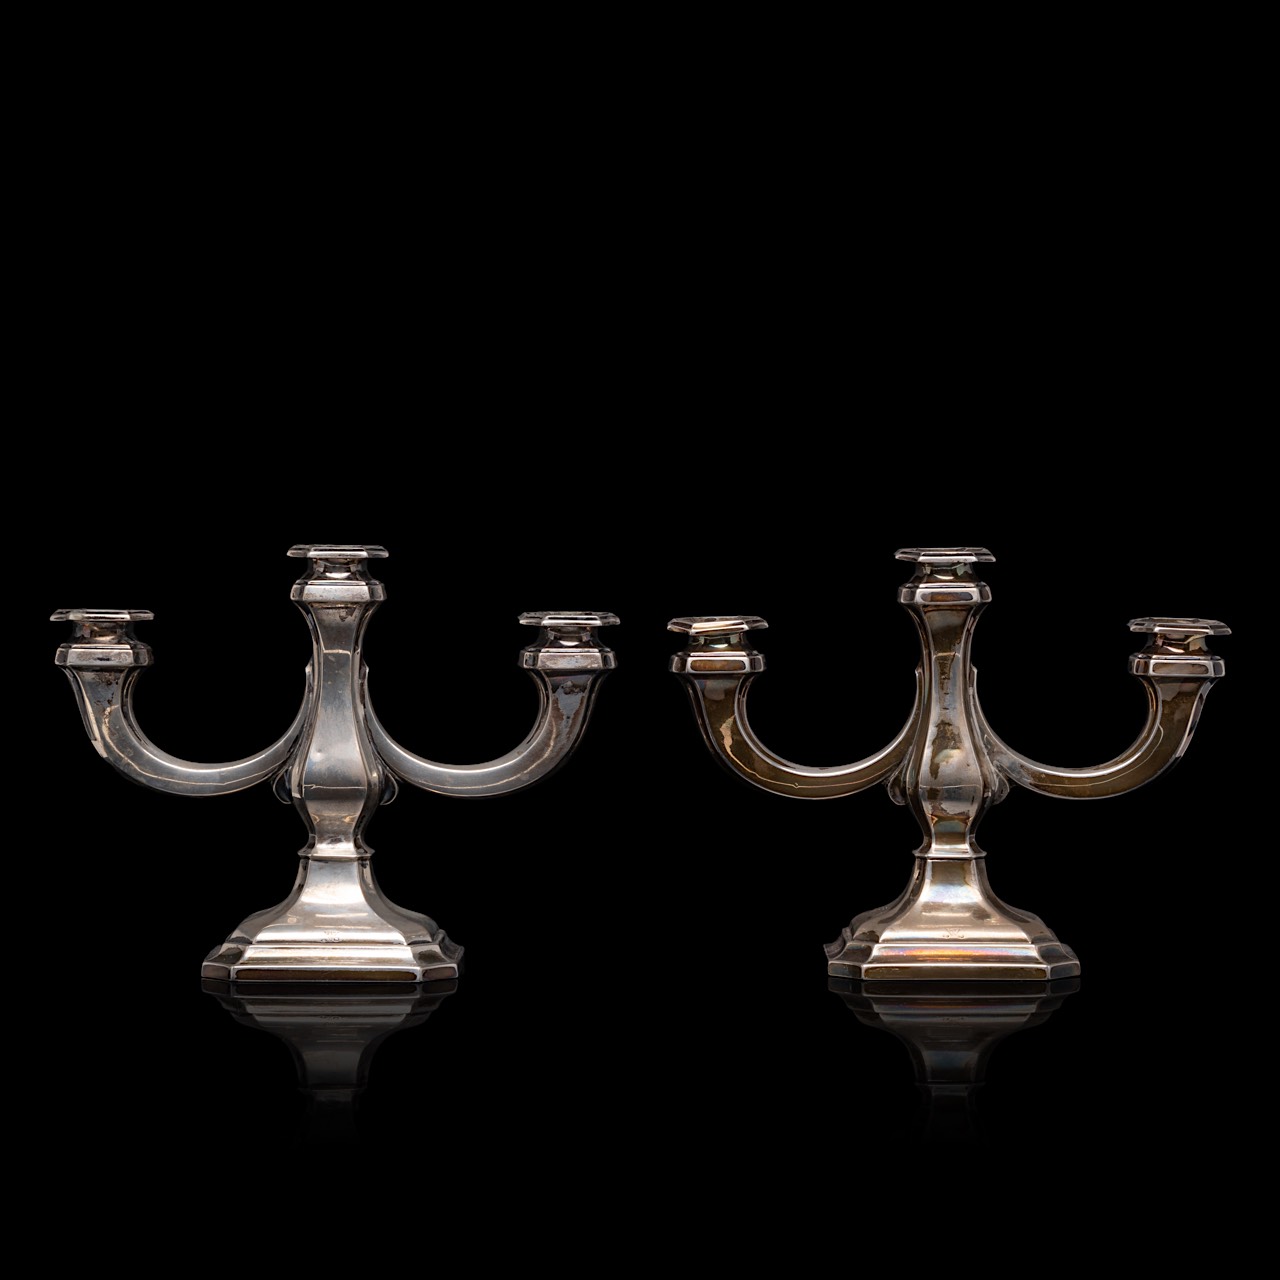 A pair of silver candlesticks, 830/000, H 18,5, total weight: ca 1251 g - Image 4 of 7